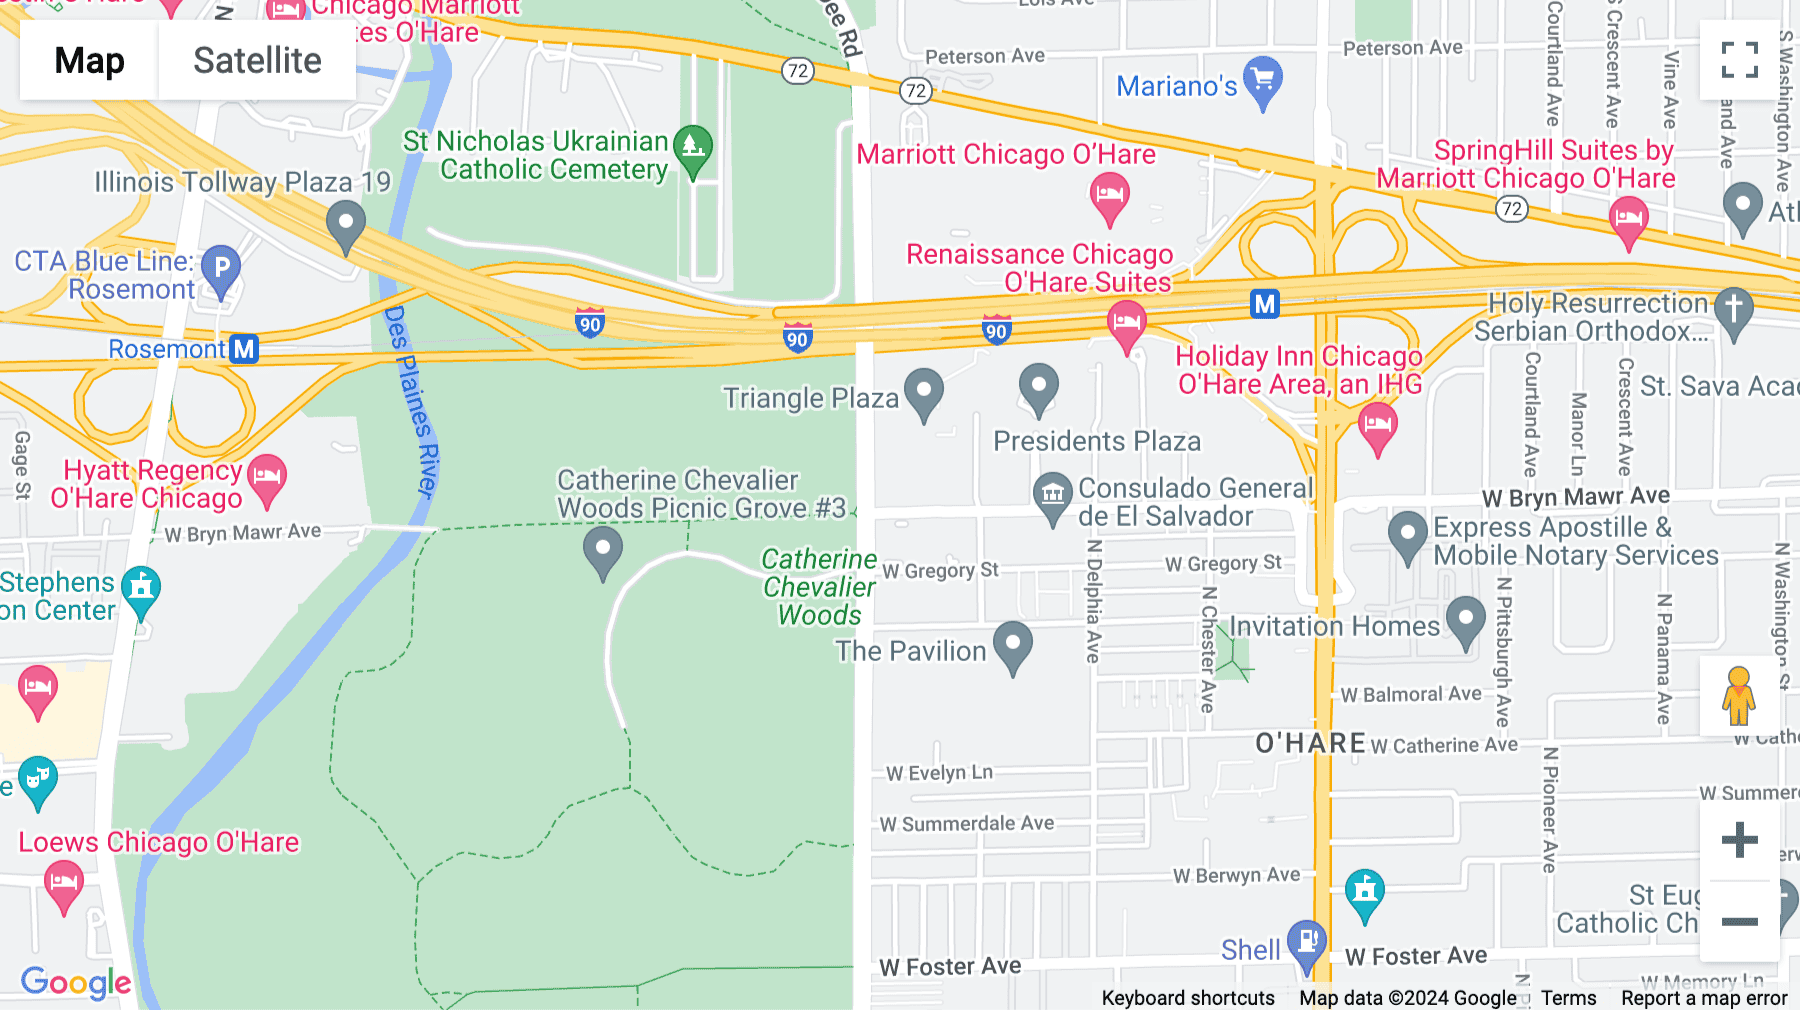 Click for interative map of 8770 West Bryn Mawr Avenue, Suite 1300, O'Hare International, Chicago